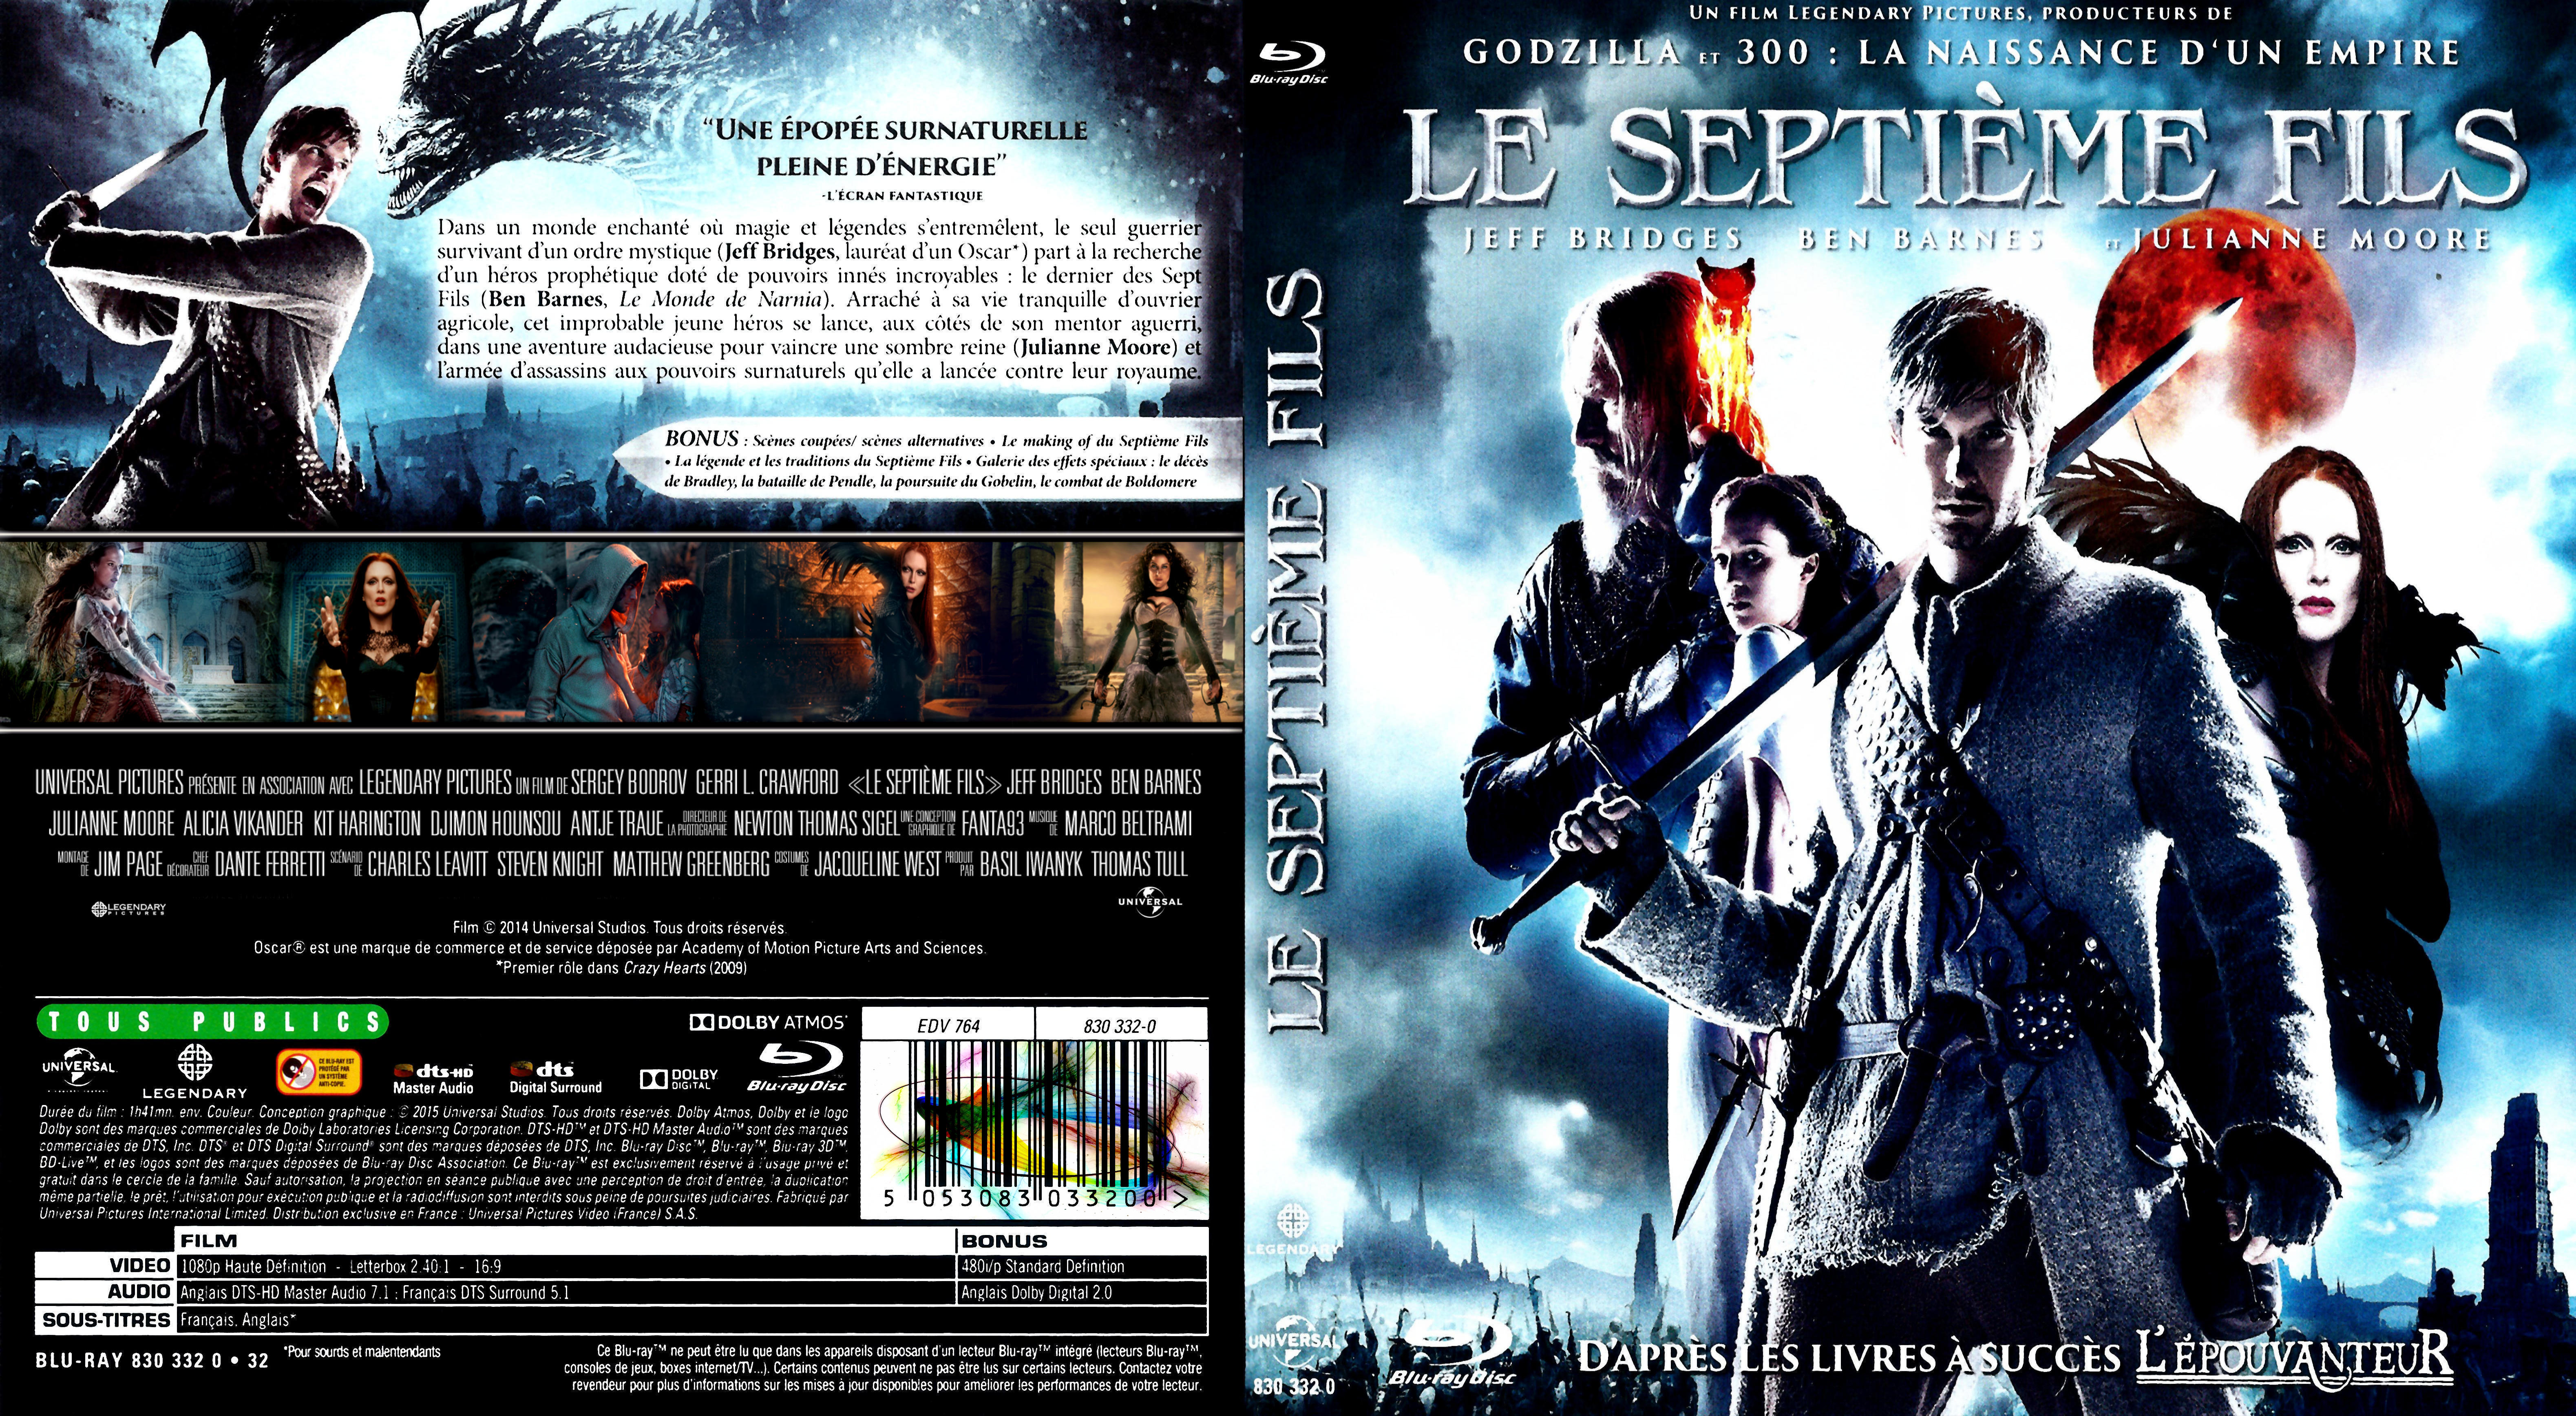 Jaquette DVD Le septime fils (BLU-RAY)